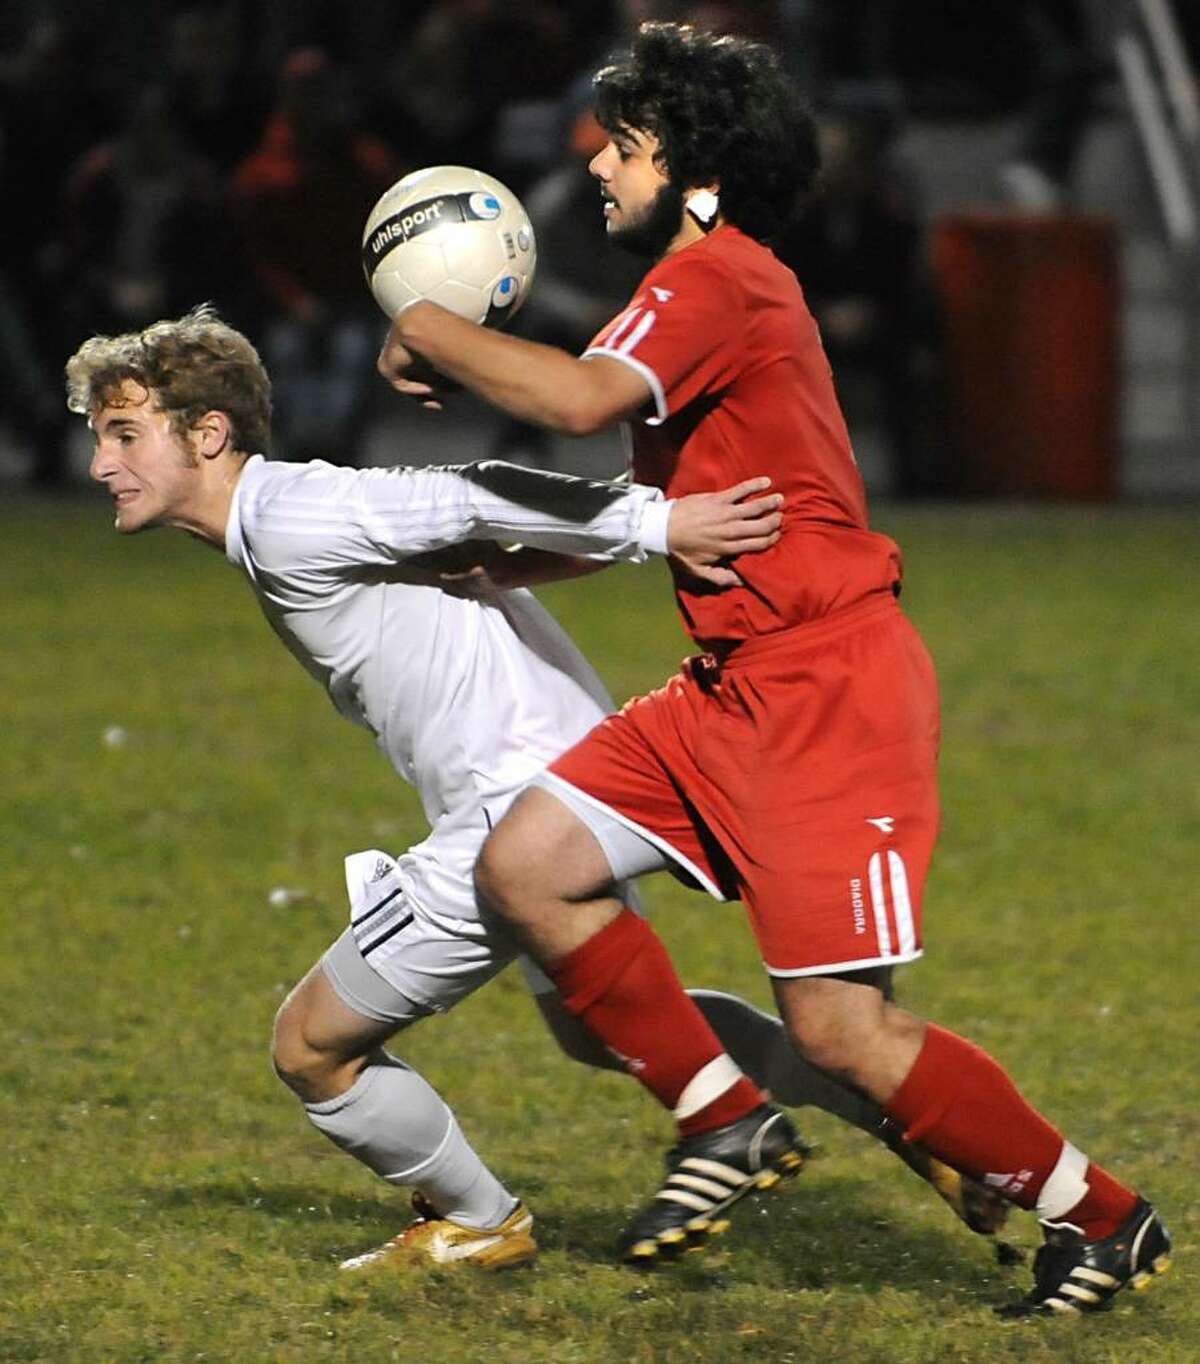 From left, Joe Cillis, of Voorheesville, and Nick Forget, of Waterford, battle for the ball during the Class CC/C boys' soccer playoff held in Colonie. (Lori Van Buren / Times Union)